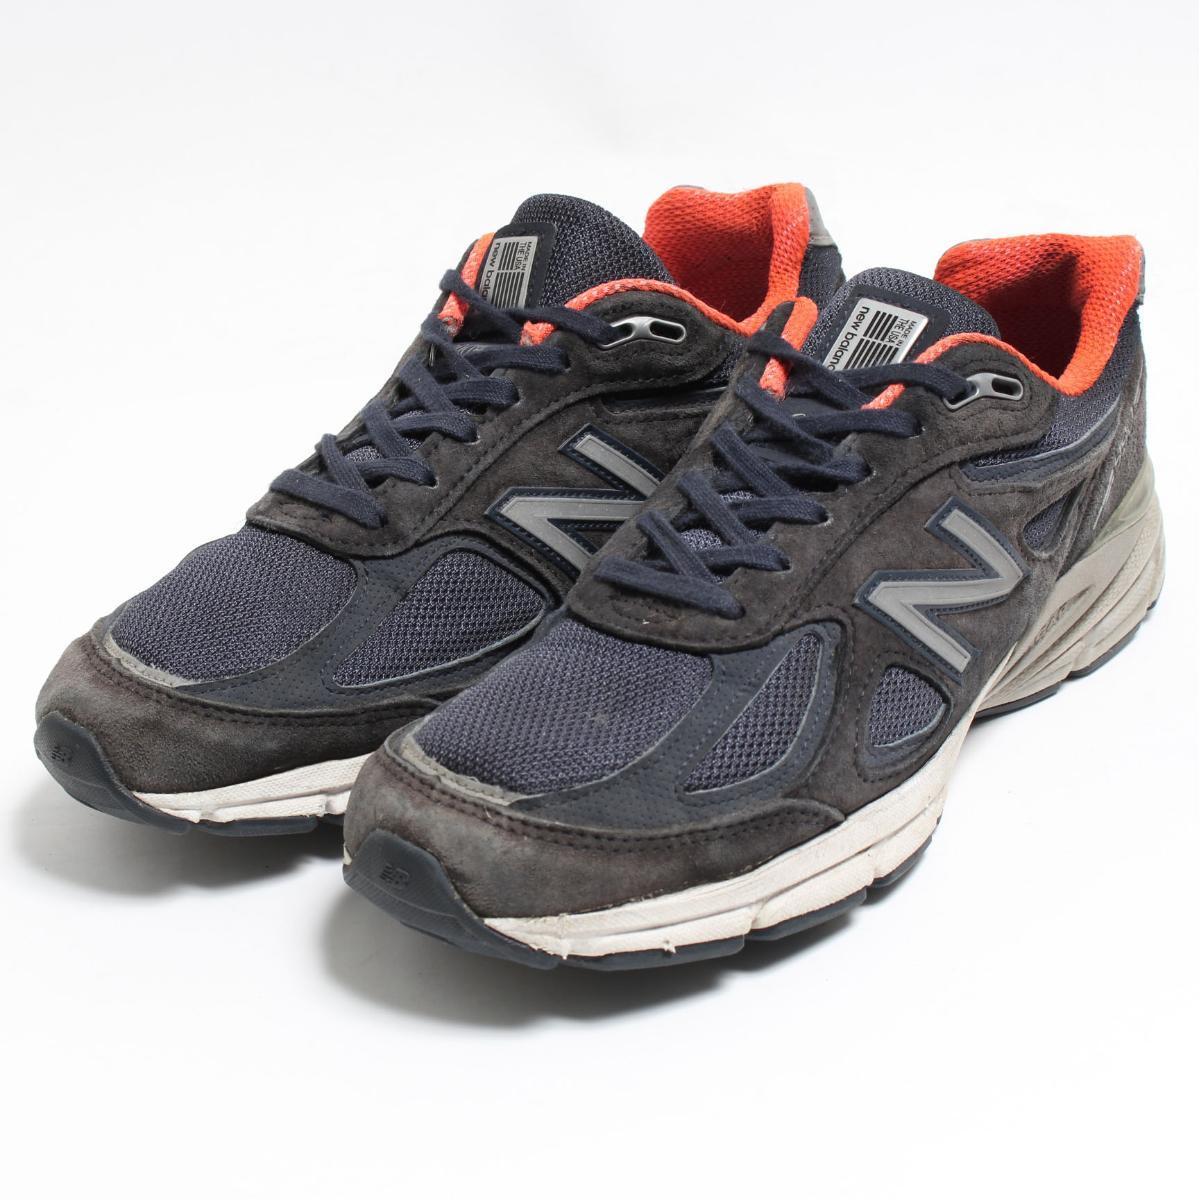 vintage new balance sneakers Sale,up to 